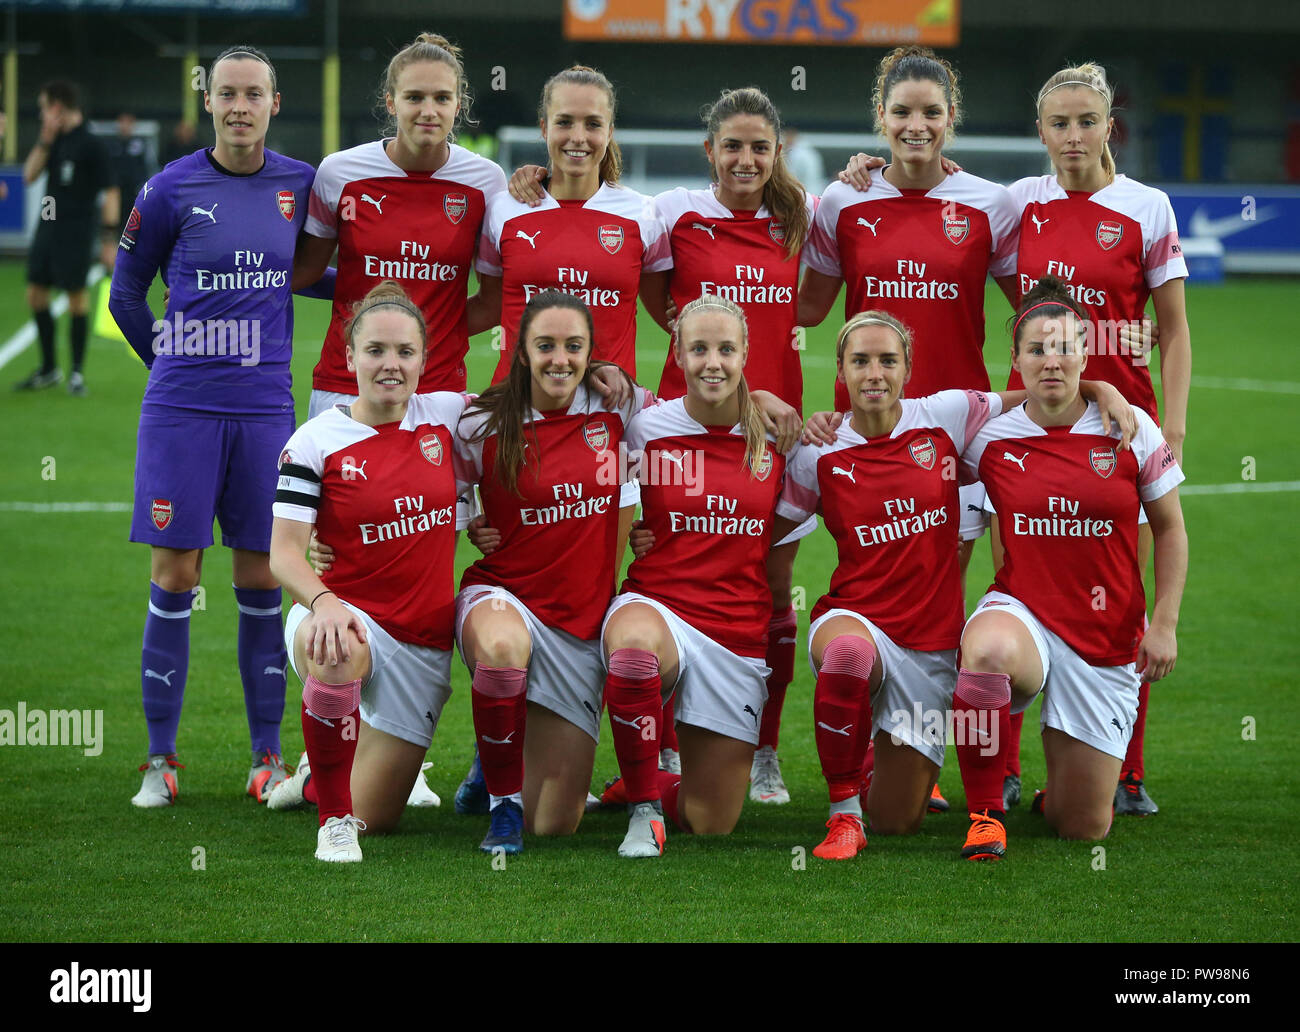 Kingston upon Thames, UK. 14 October 2018.  Arsenal Team shoot during The FA Women's Super League match between Chelsea FC Women and Arsenal at Kingsmeadow Stadium, Kingston upon Thames, England on 14 Oct 2018.  Credit Action Foto Sport Credit: Action Foto Sport/Alamy Live News Credit: Action Foto Sport/Alamy Live News Stock Photo